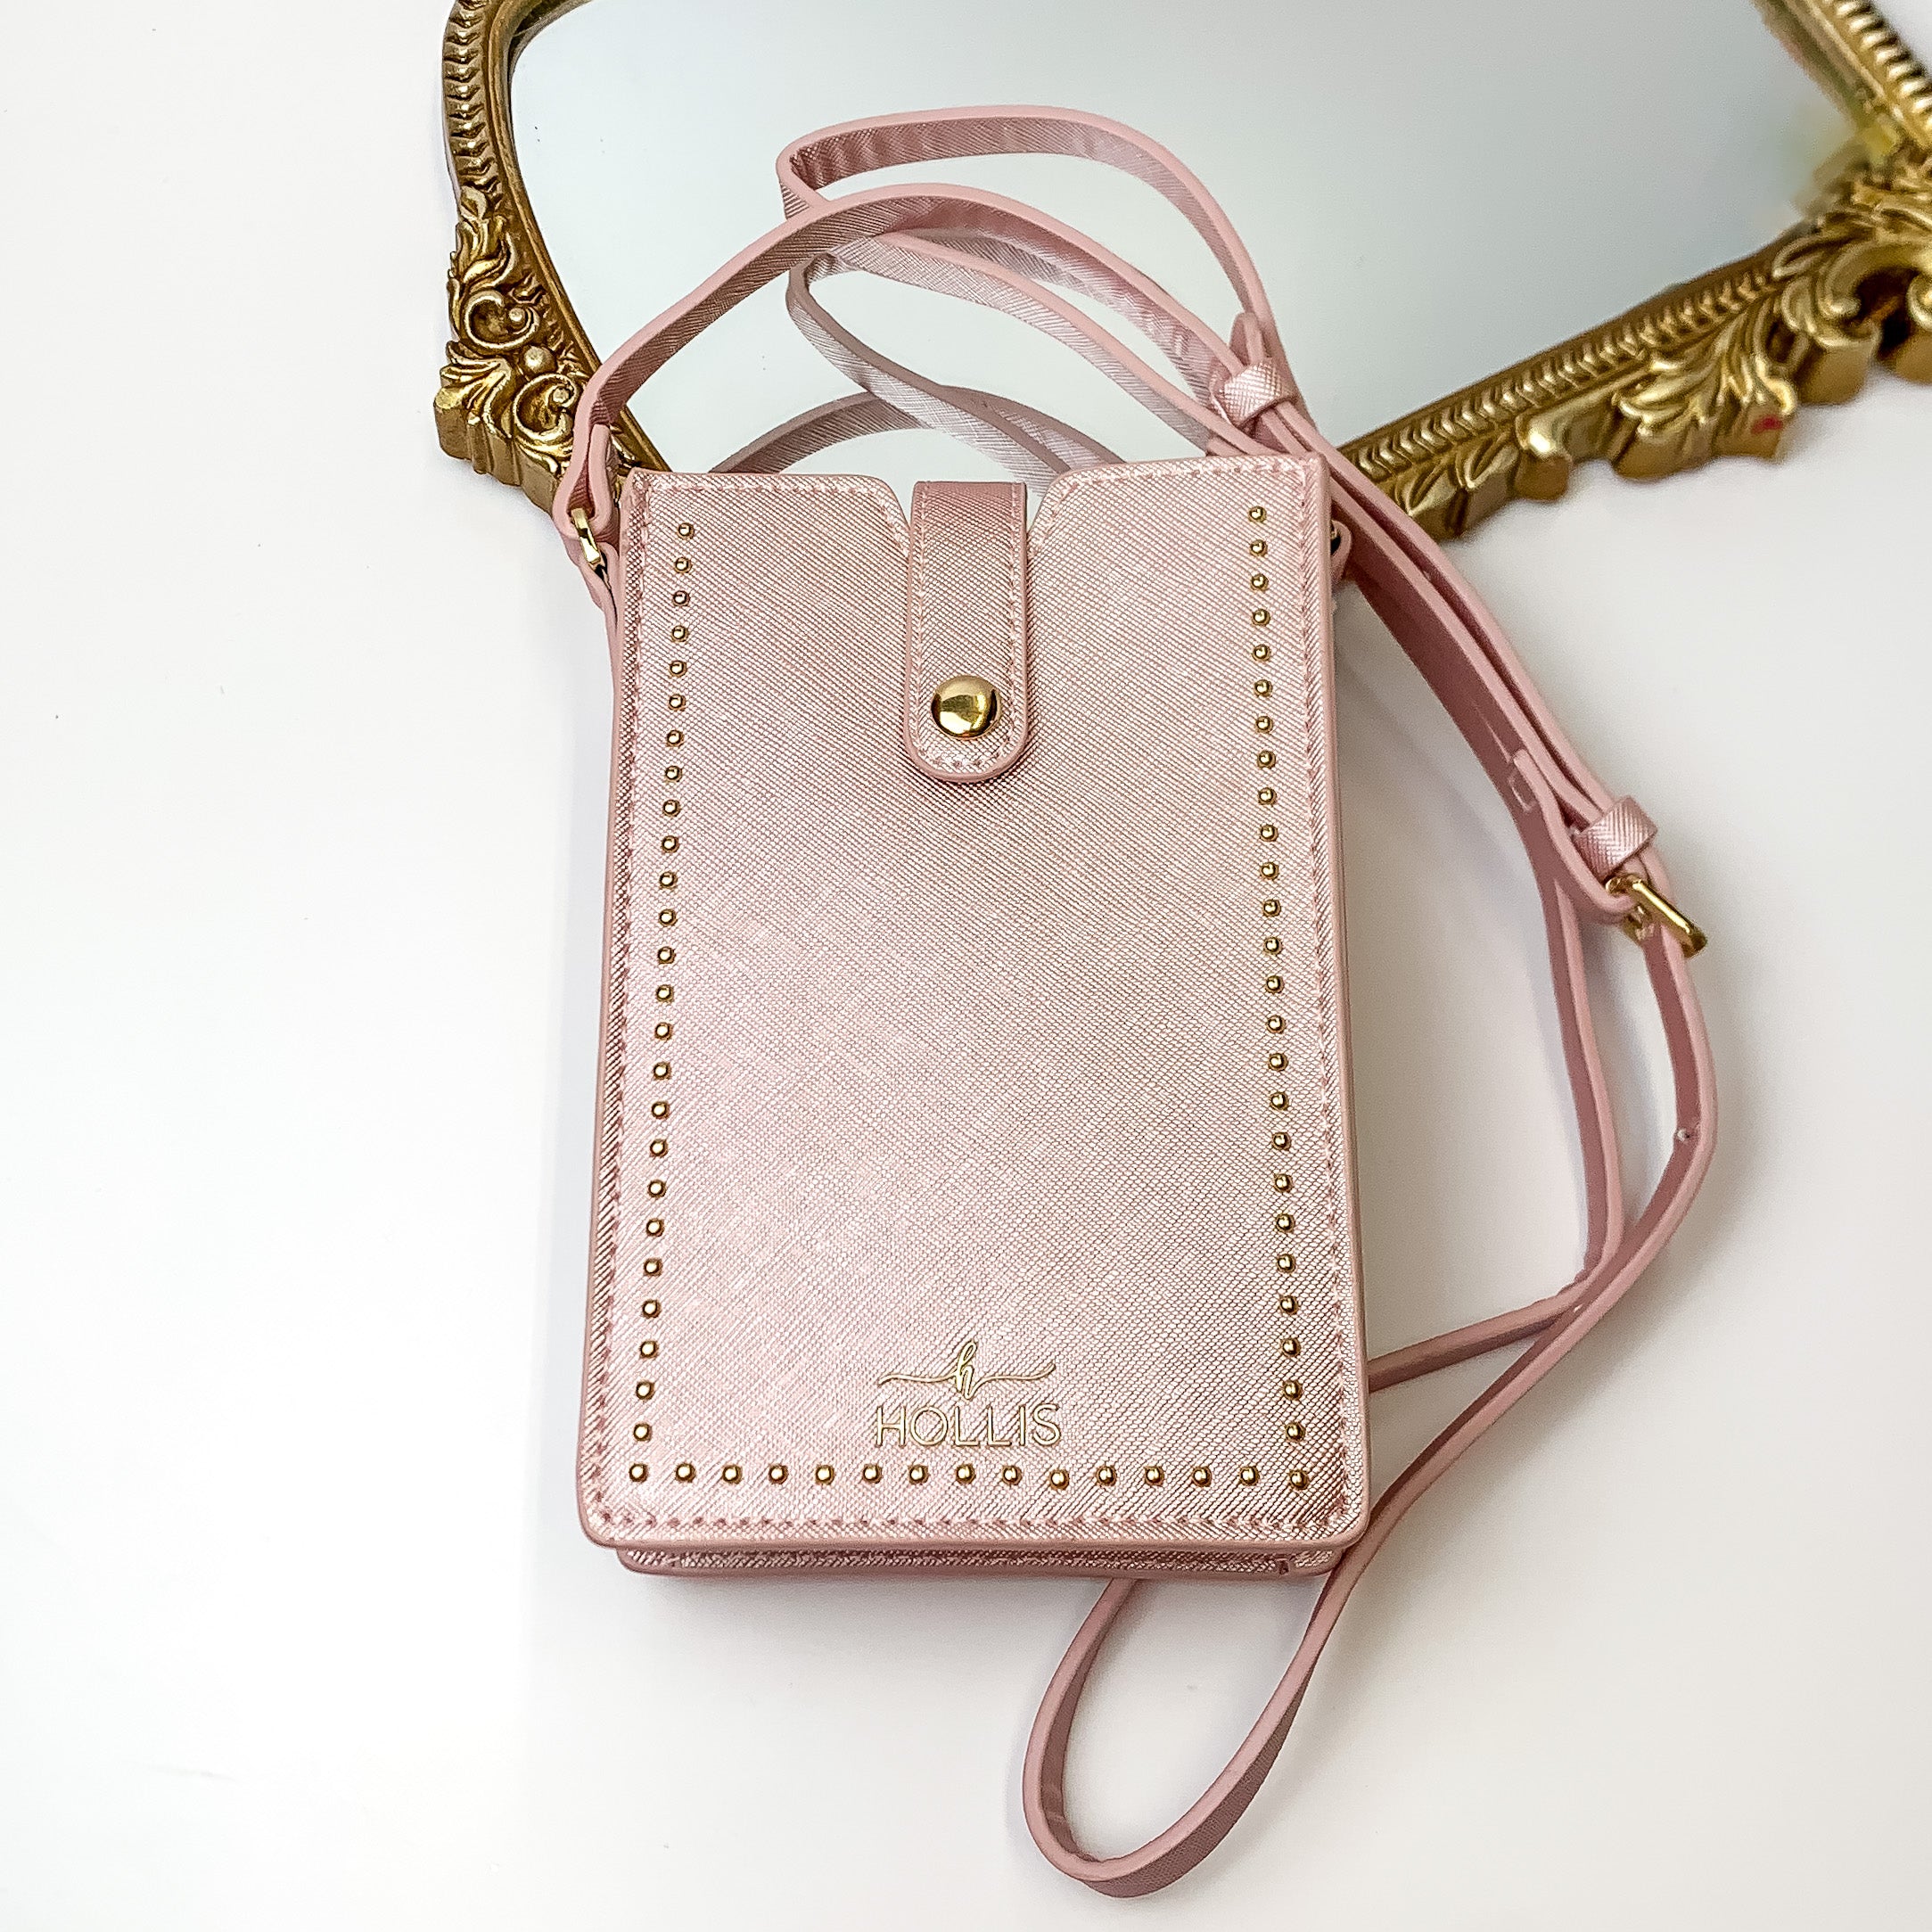 Metallic blush, rectangle purse with gold studs pictured in front of a gold mirror on a white background. 